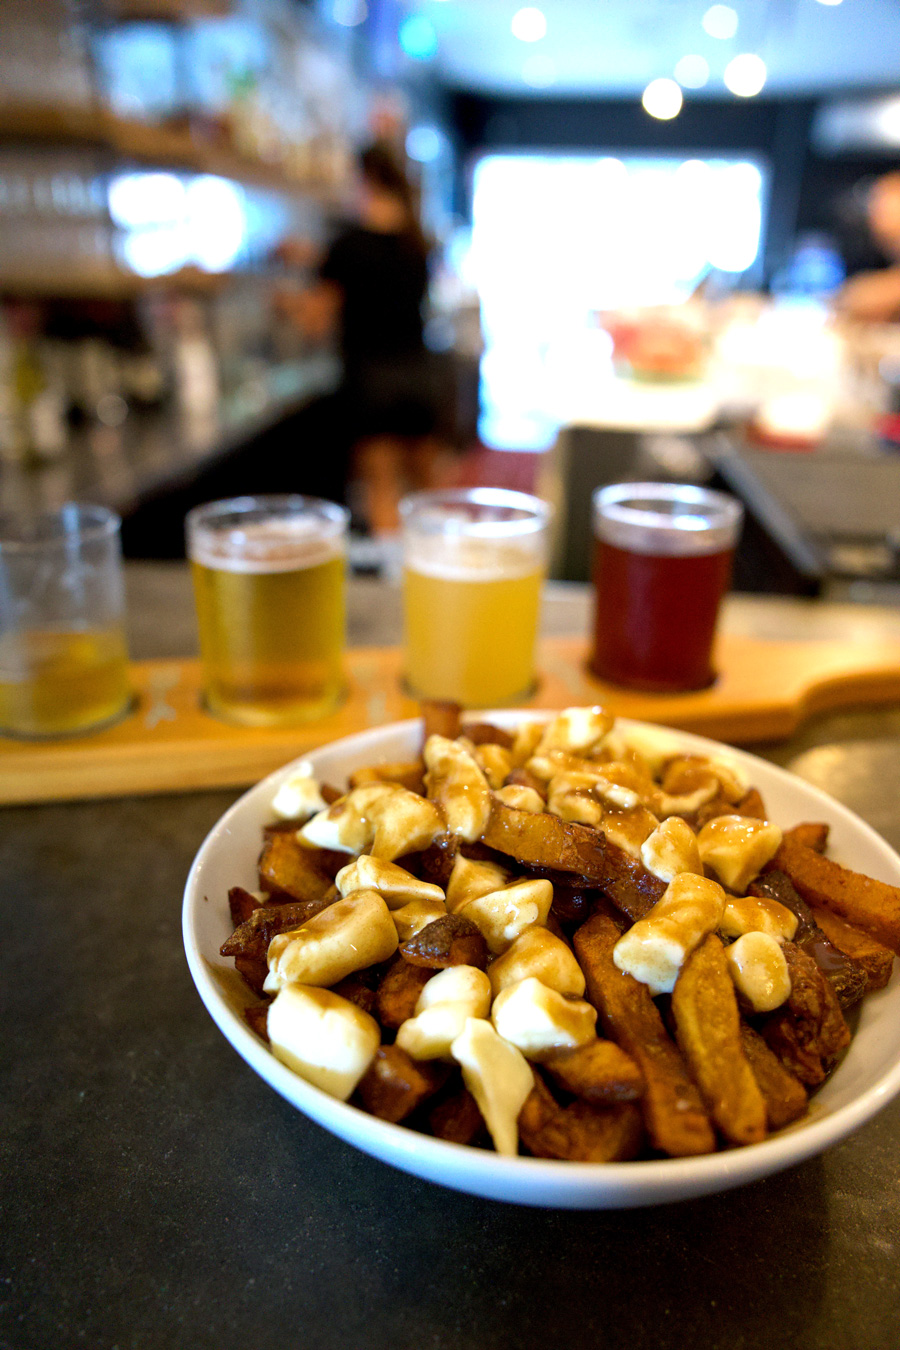 King West Brewing Company's poutine